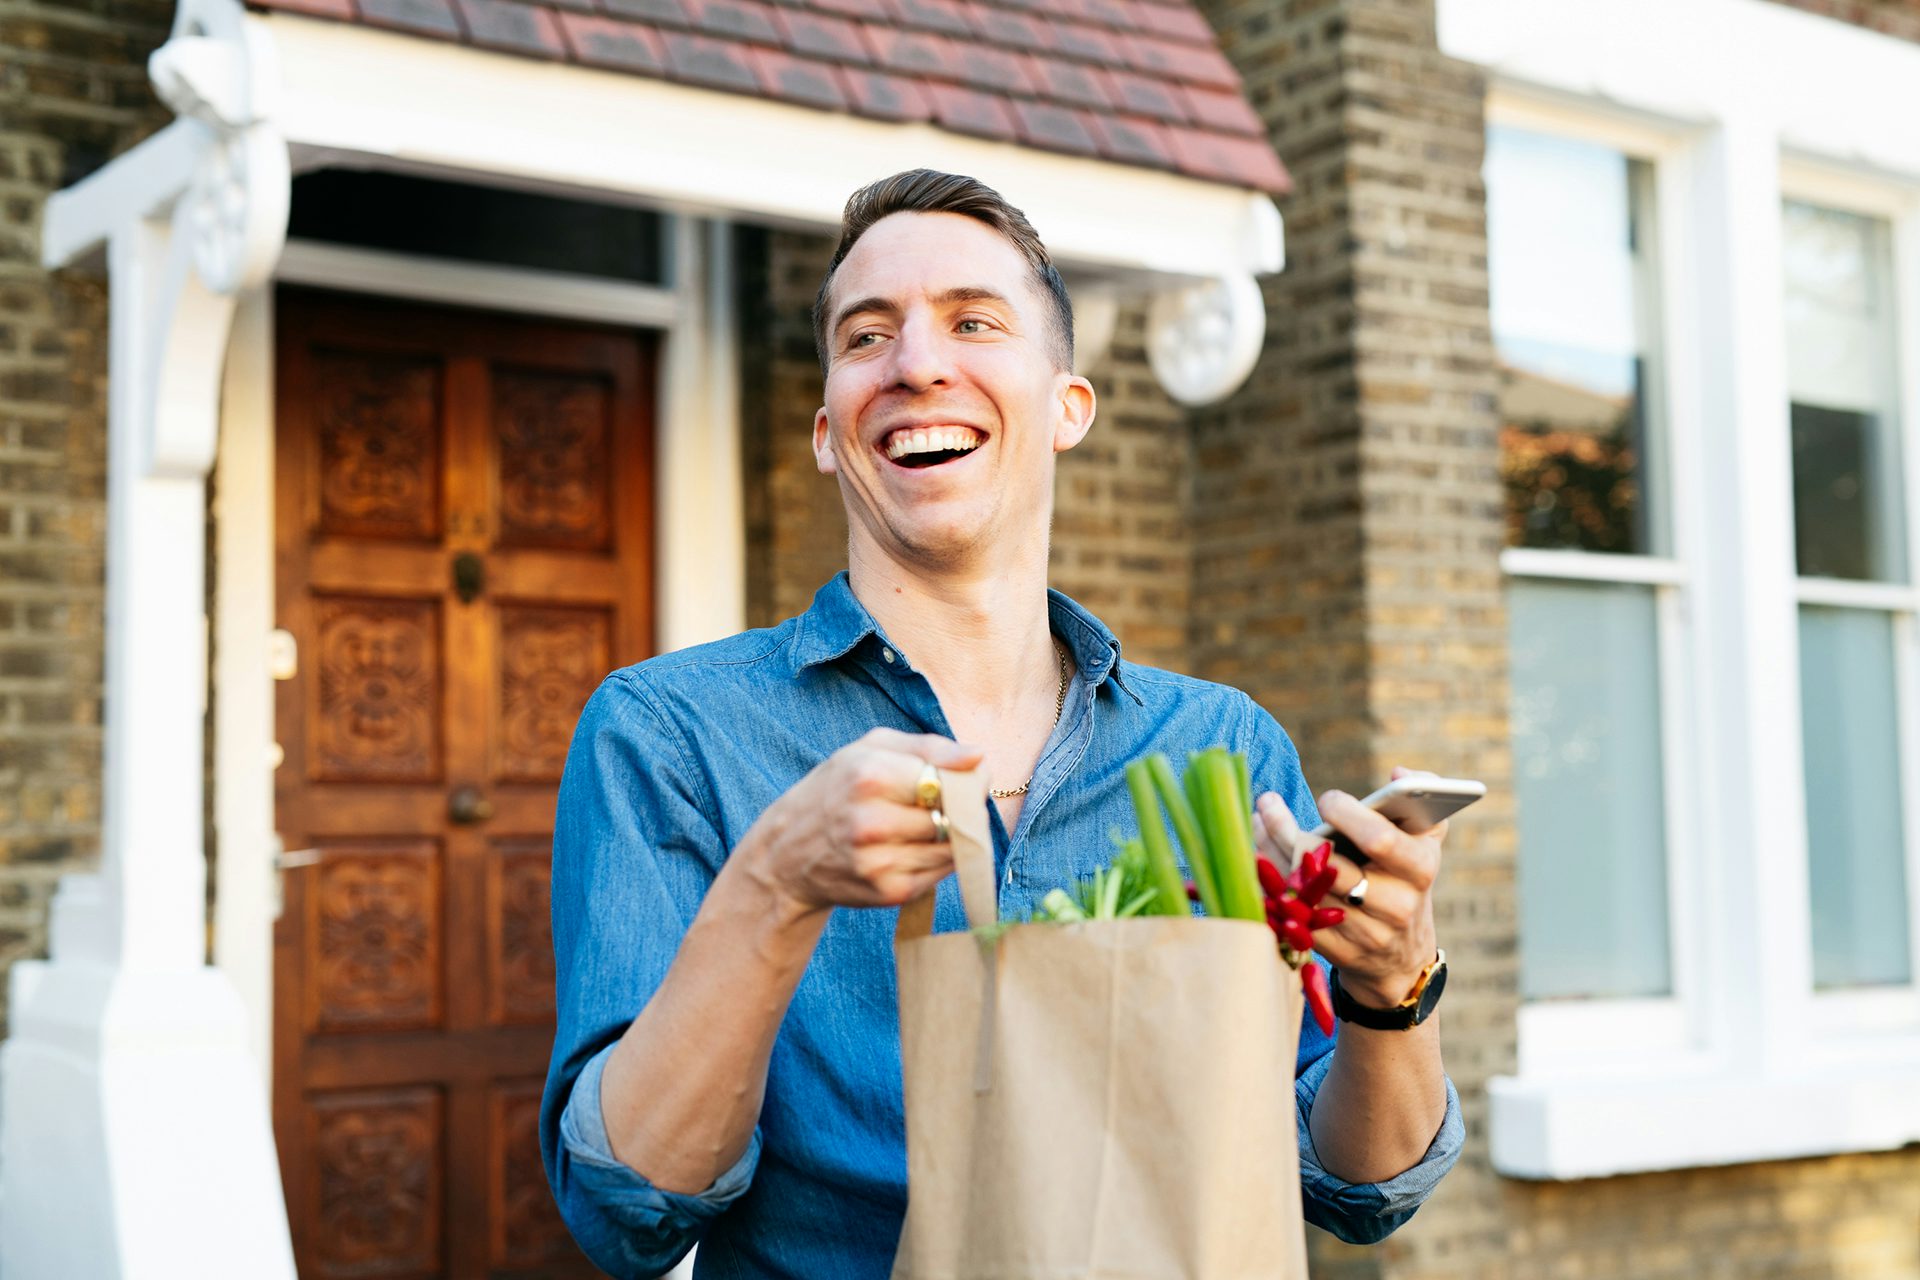 Photograph of a person outside a house carrying a paper bag with produce